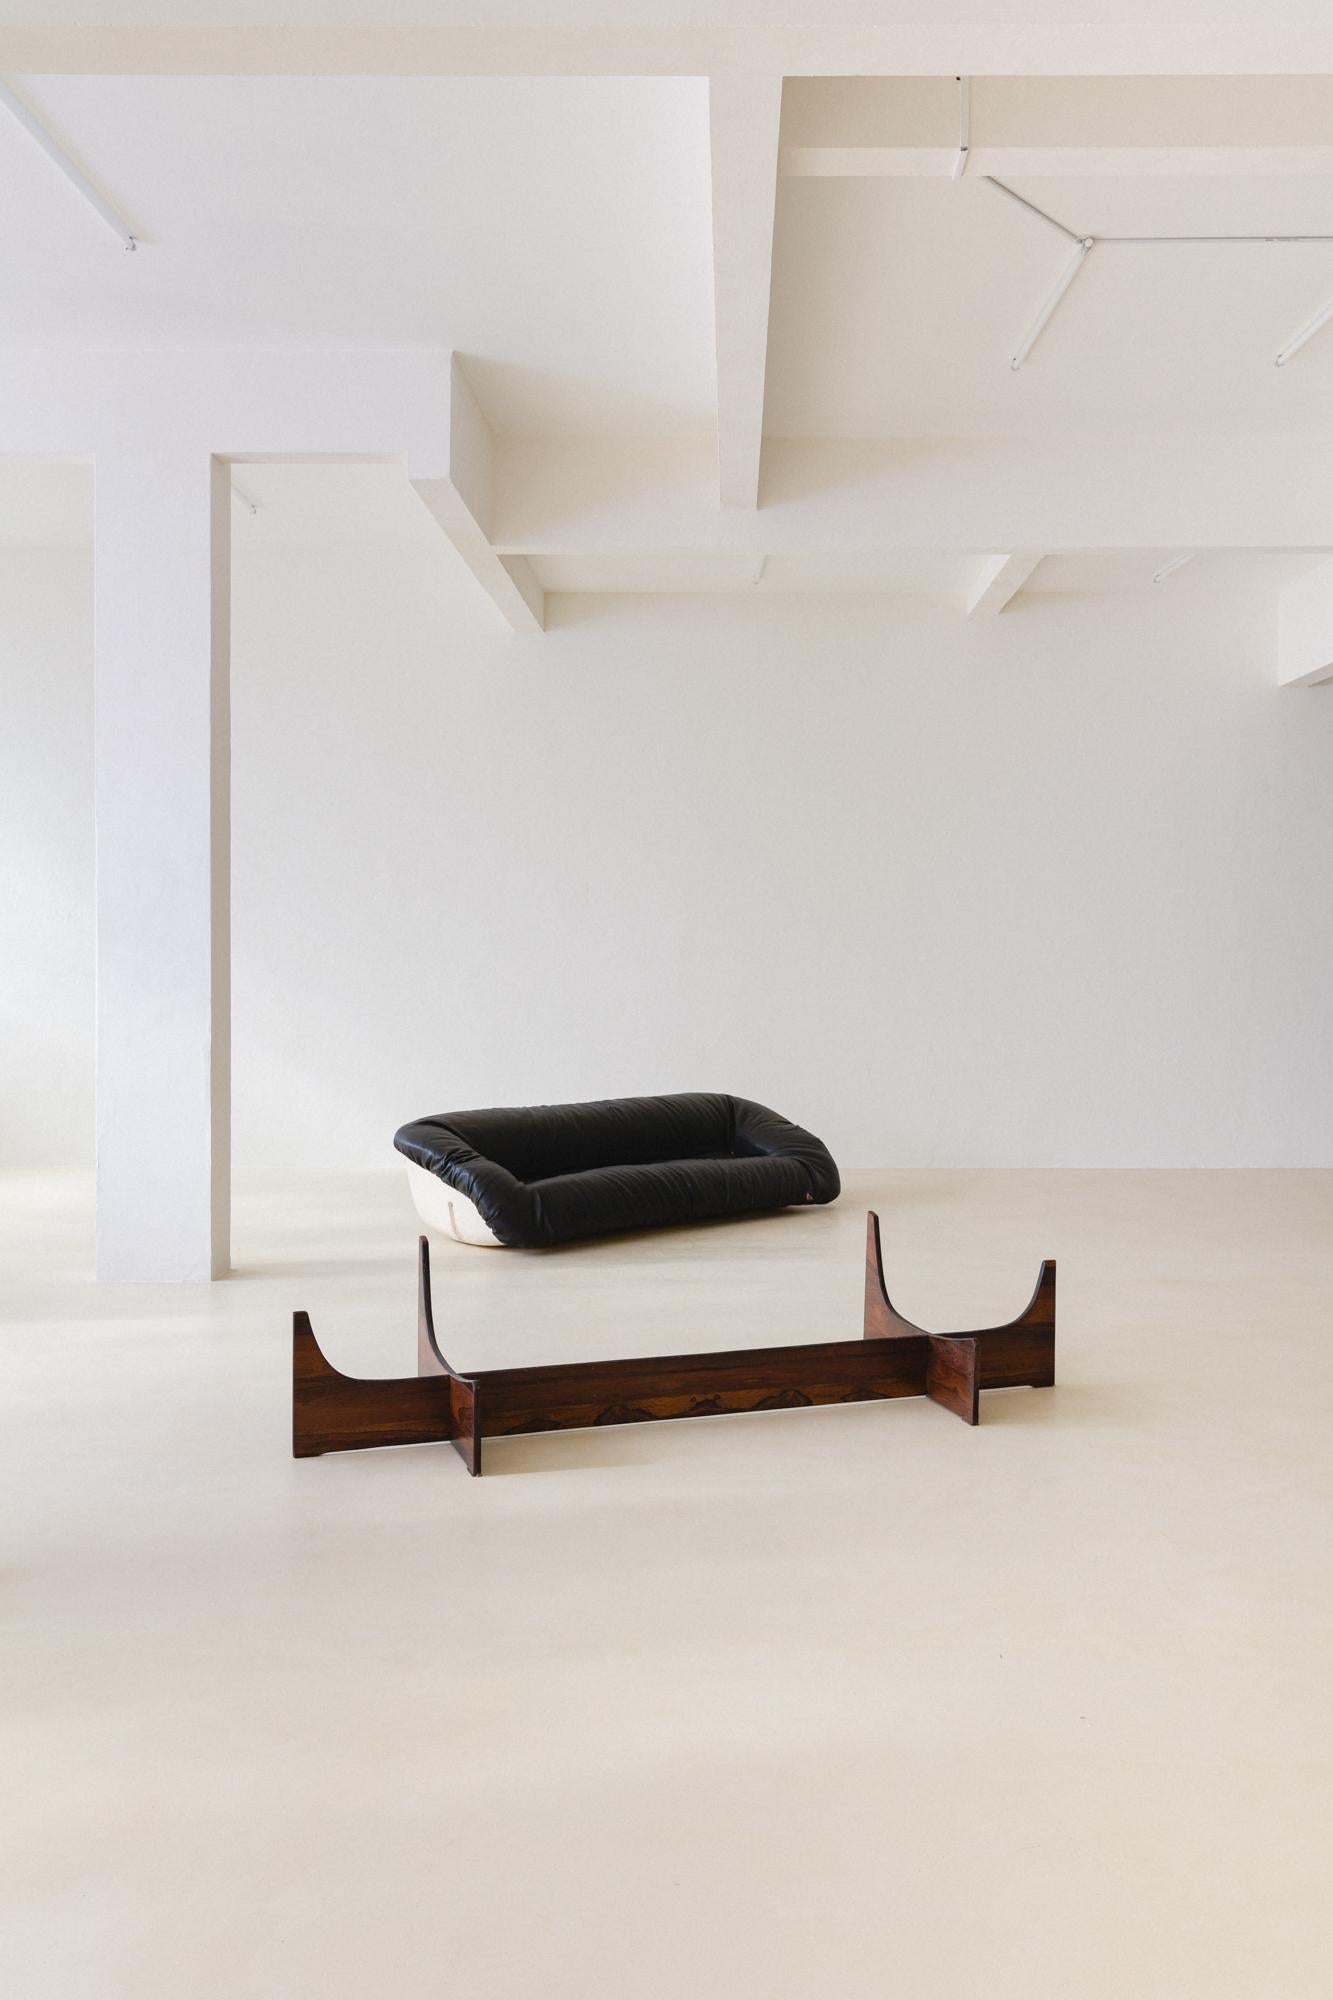 Late 20th Century Sofa Mp-61 in Rosewood by Brazilian Designer Percival Lafer, 1973 For Sale